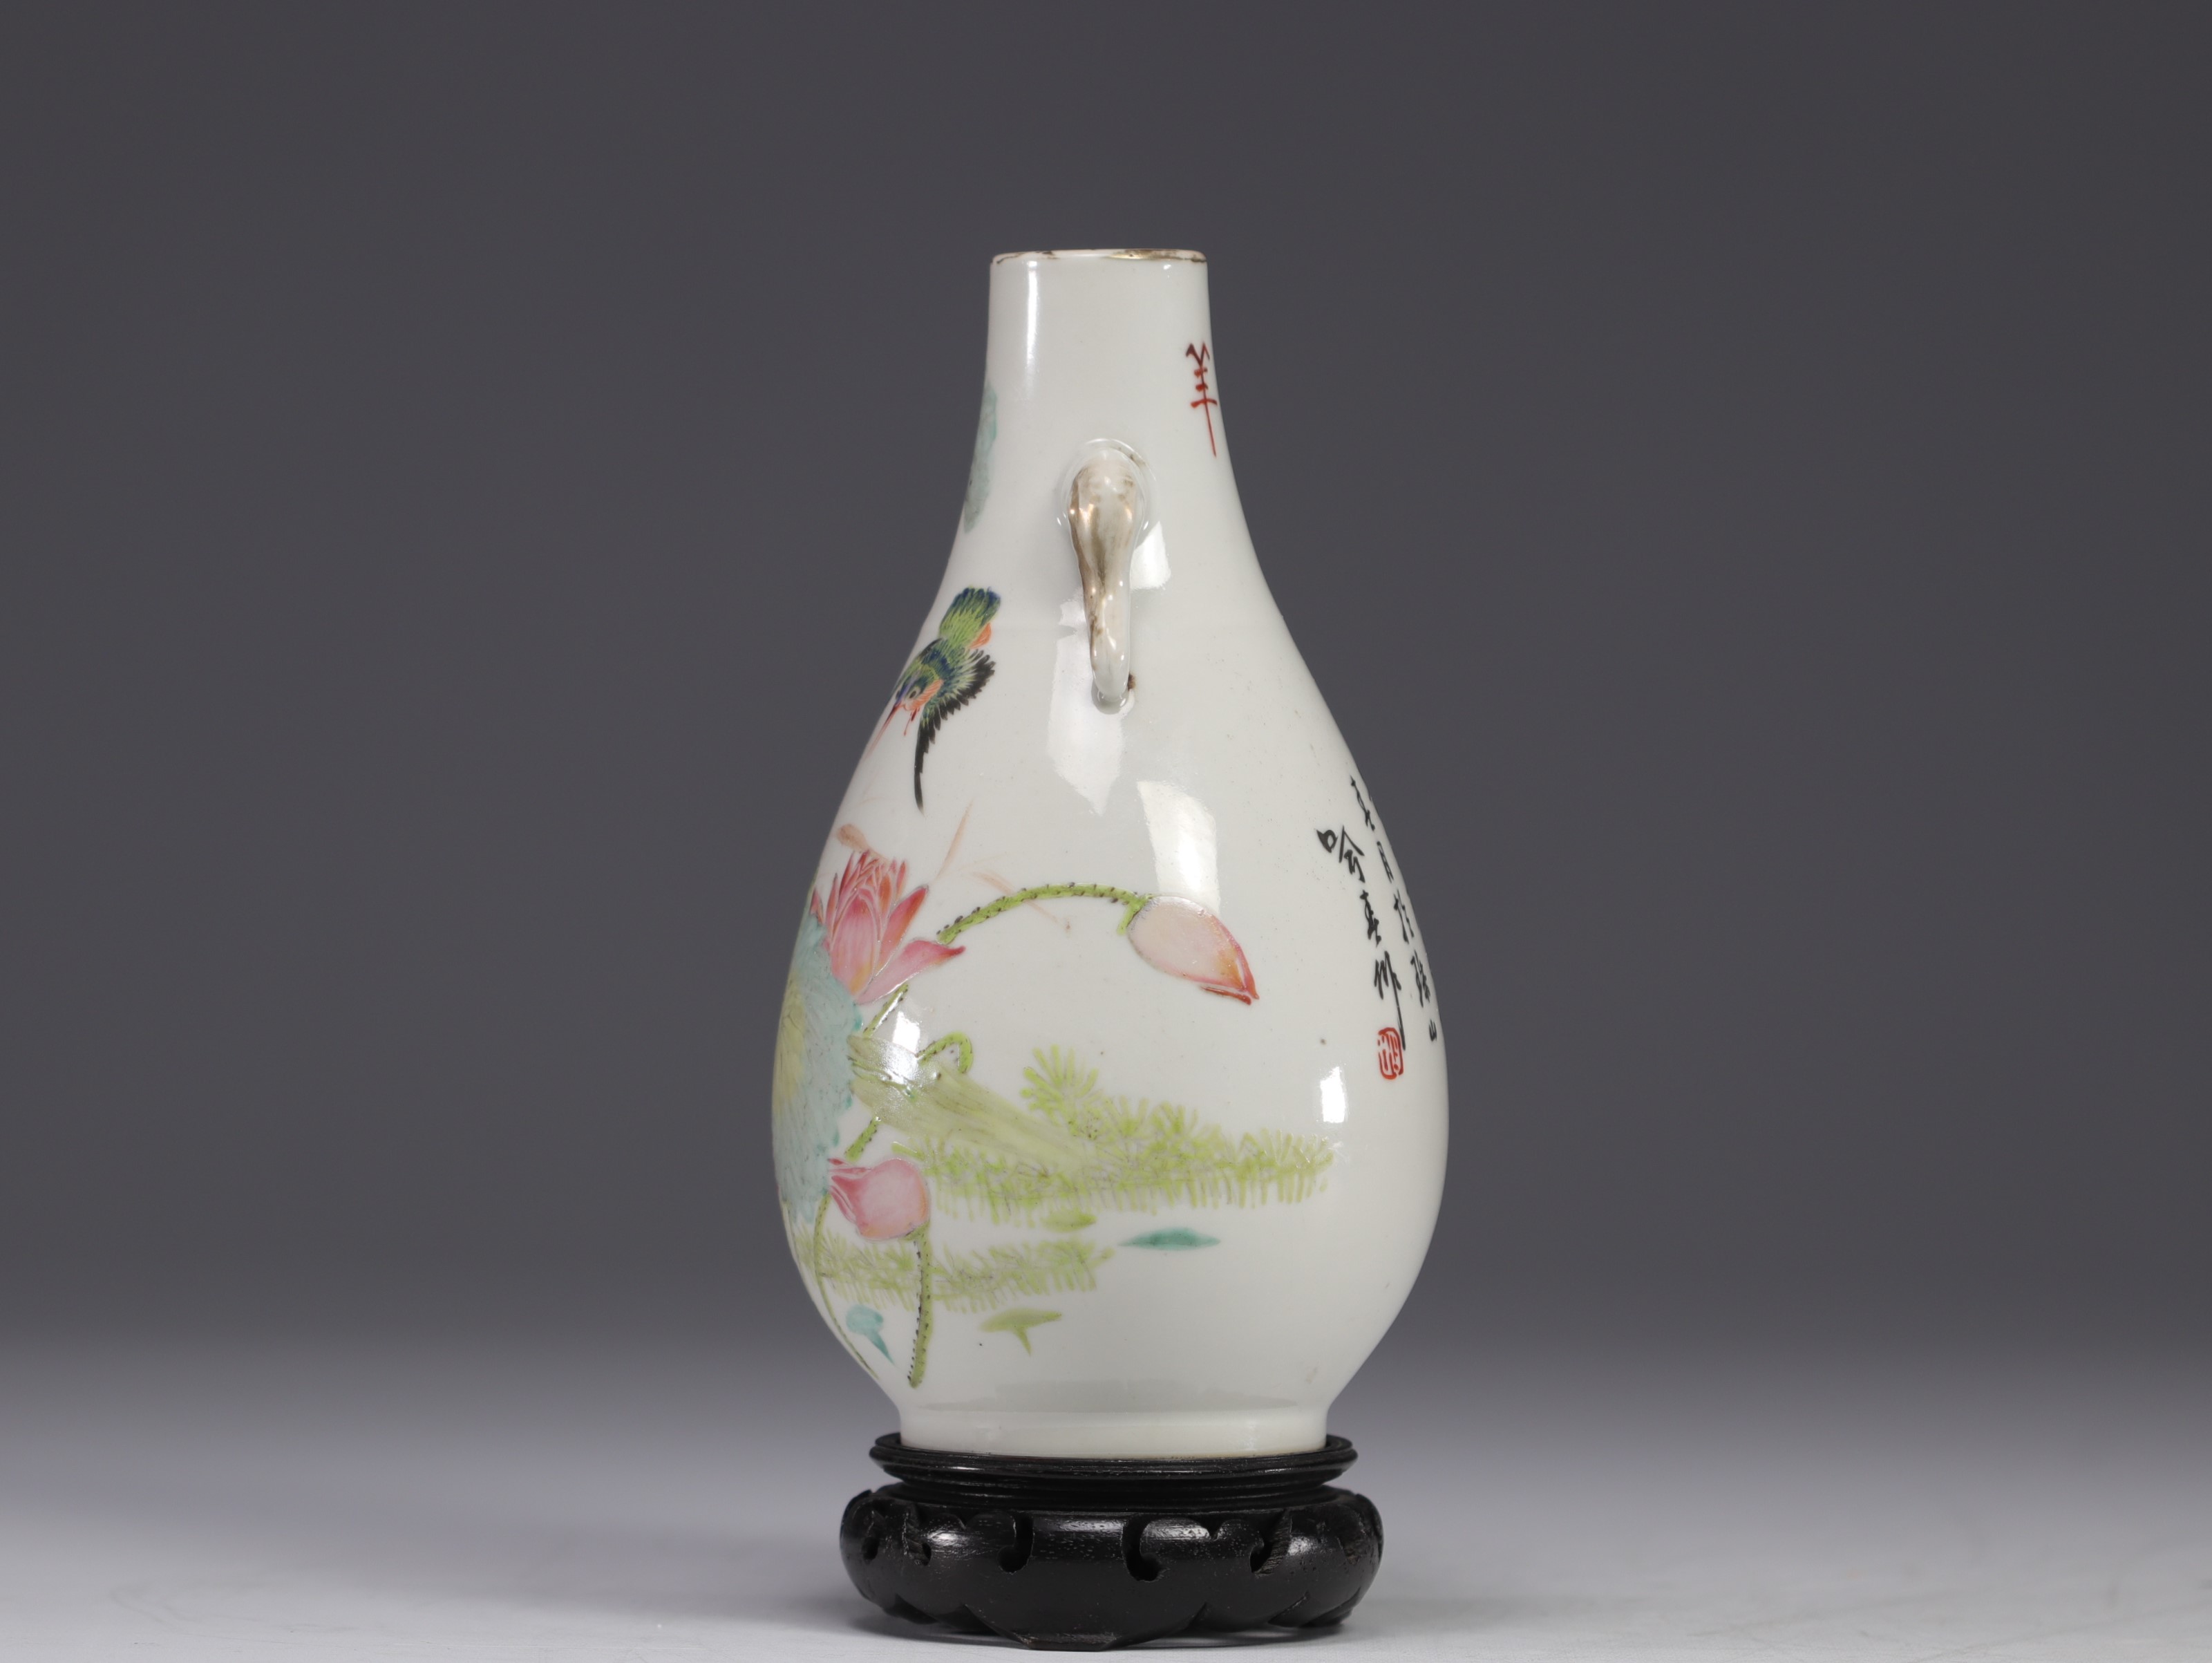 China, Qianjiang cai porcelain vase decorated with flowers and birds, 19th century. - Image 2 of 6